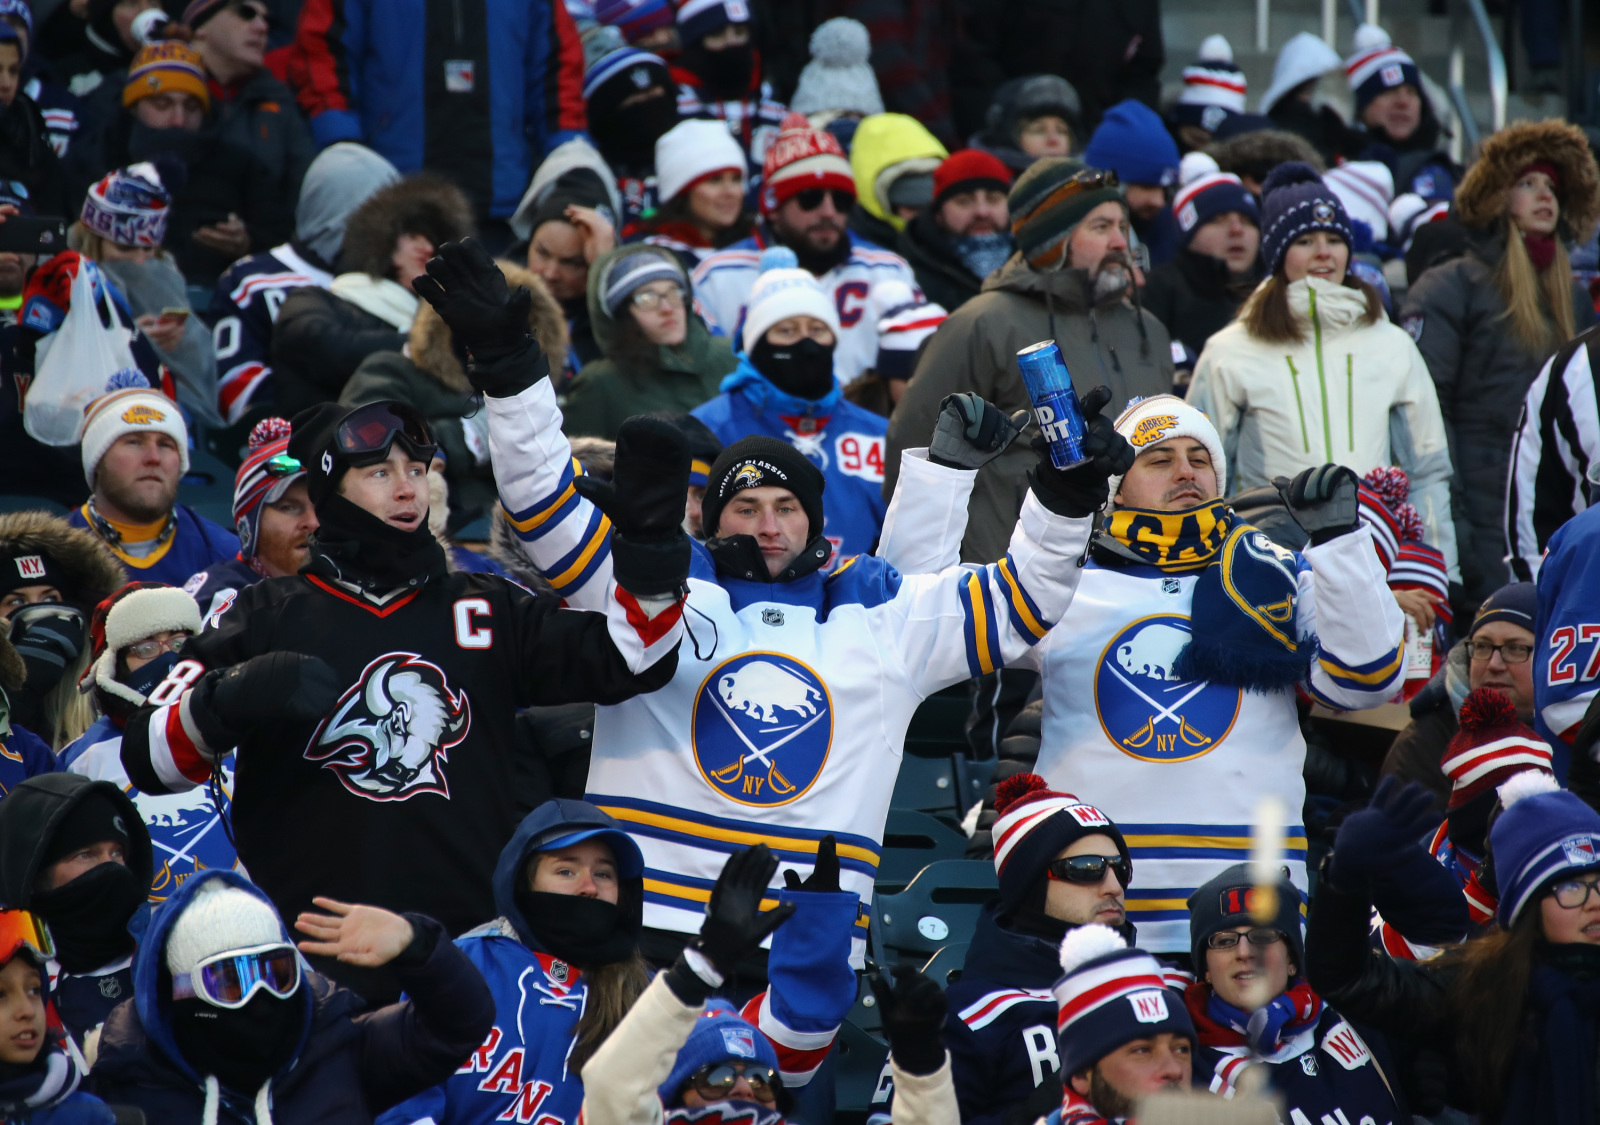 Fans are thrilled as the Sabres reveal their full 2018 Winter